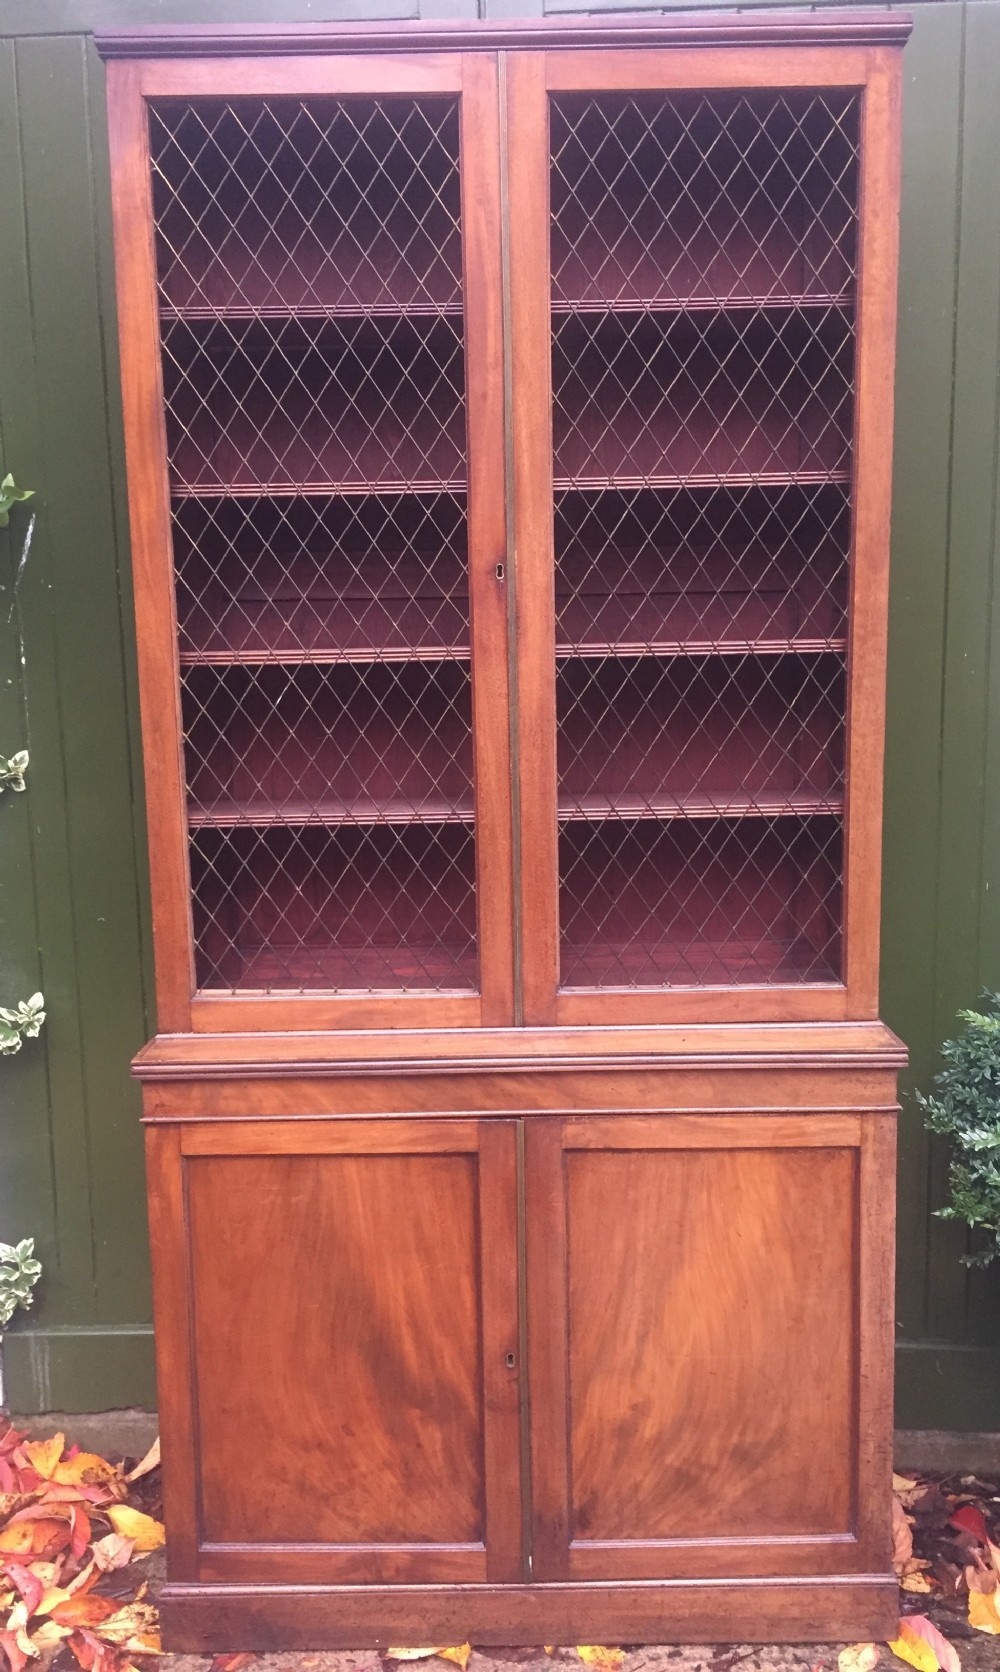 late c18th early c19th george iii period mahogany 2door bookcase with grille door top and cupboard base